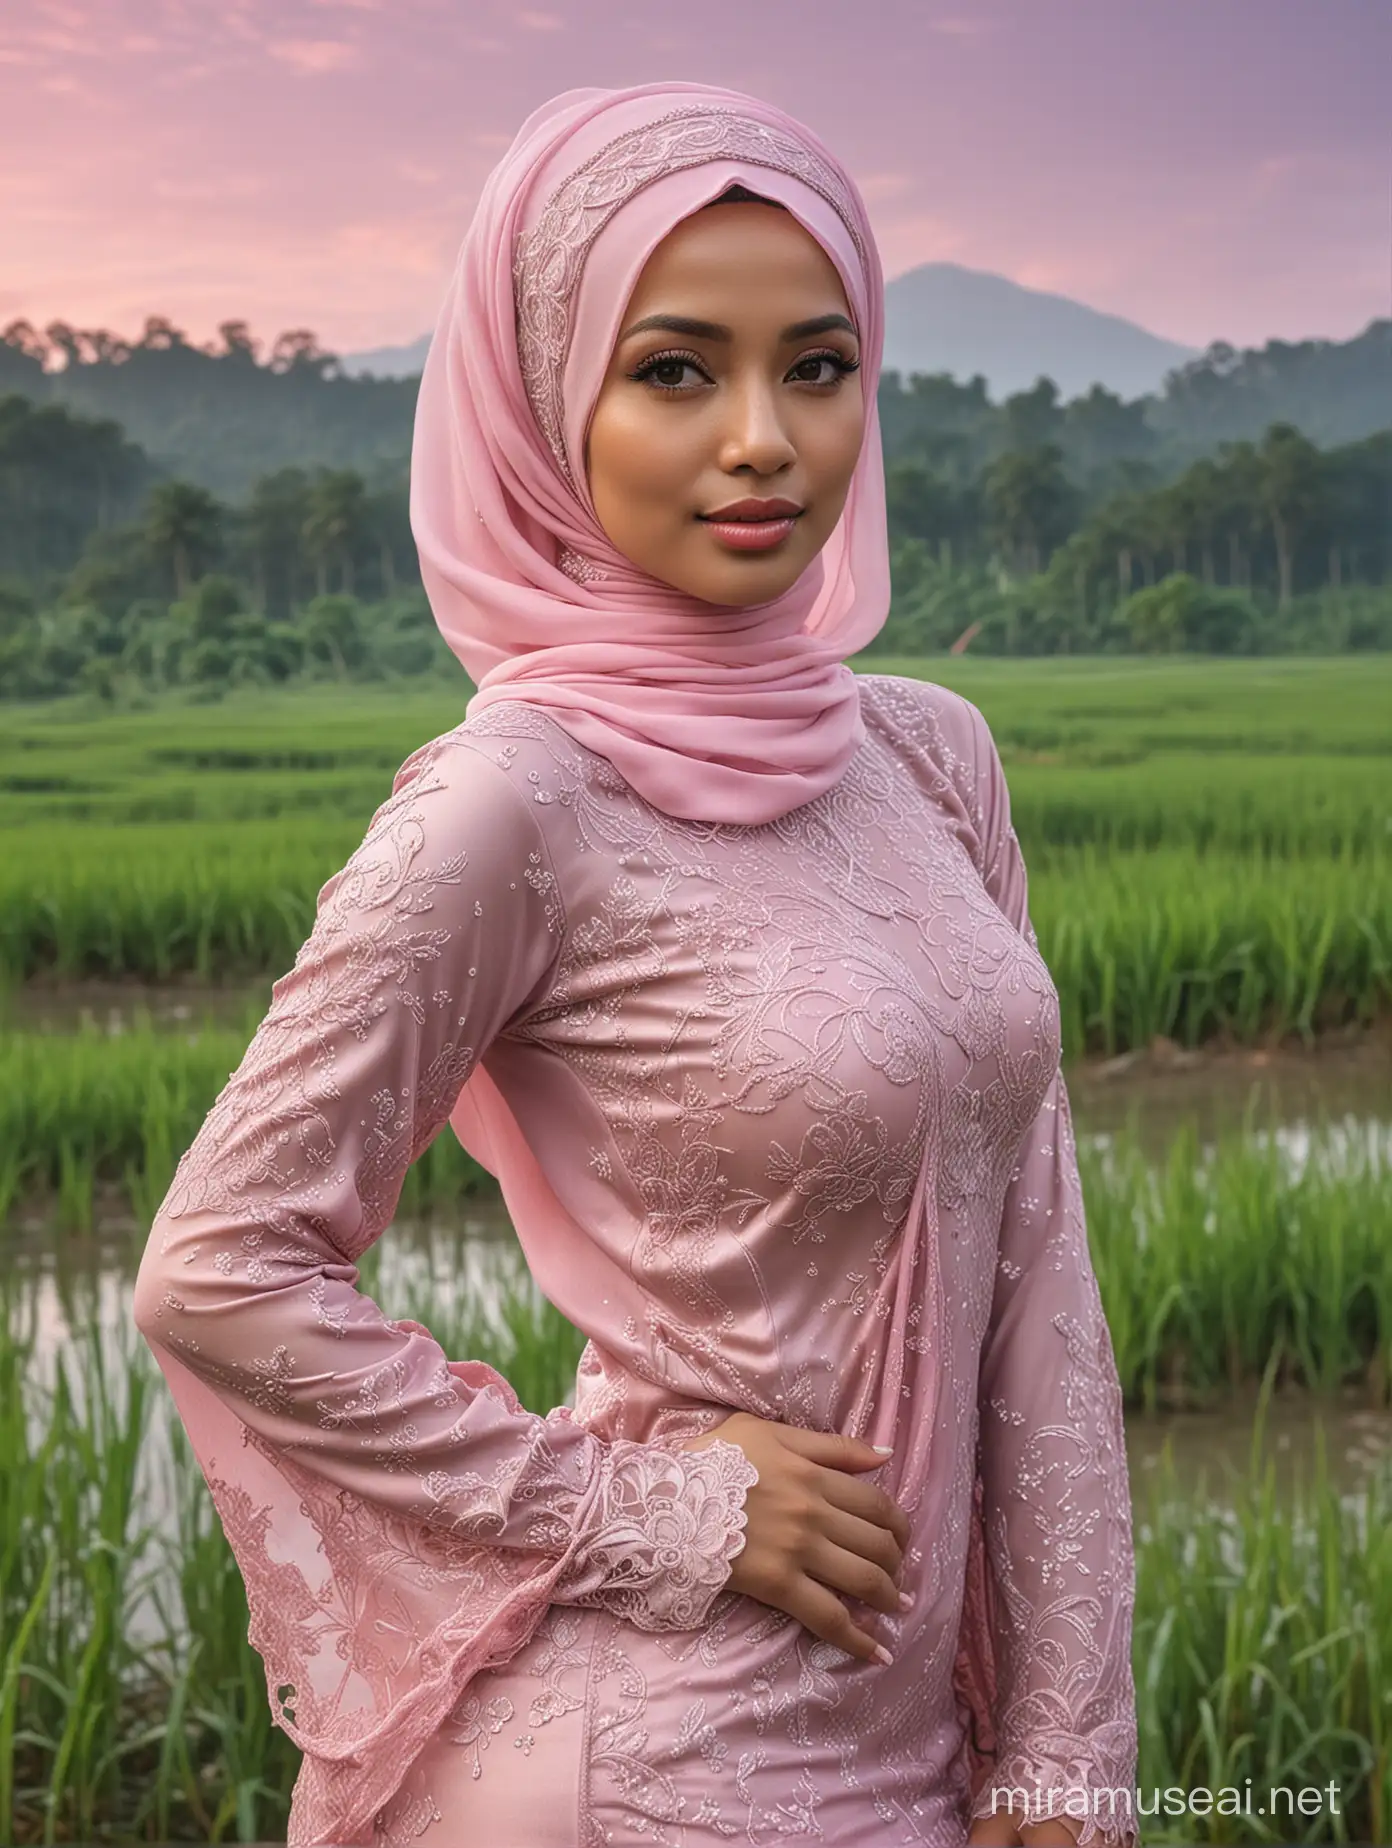 Malaysian Woman in Hijab Stands Amidst Rice Field Beauty